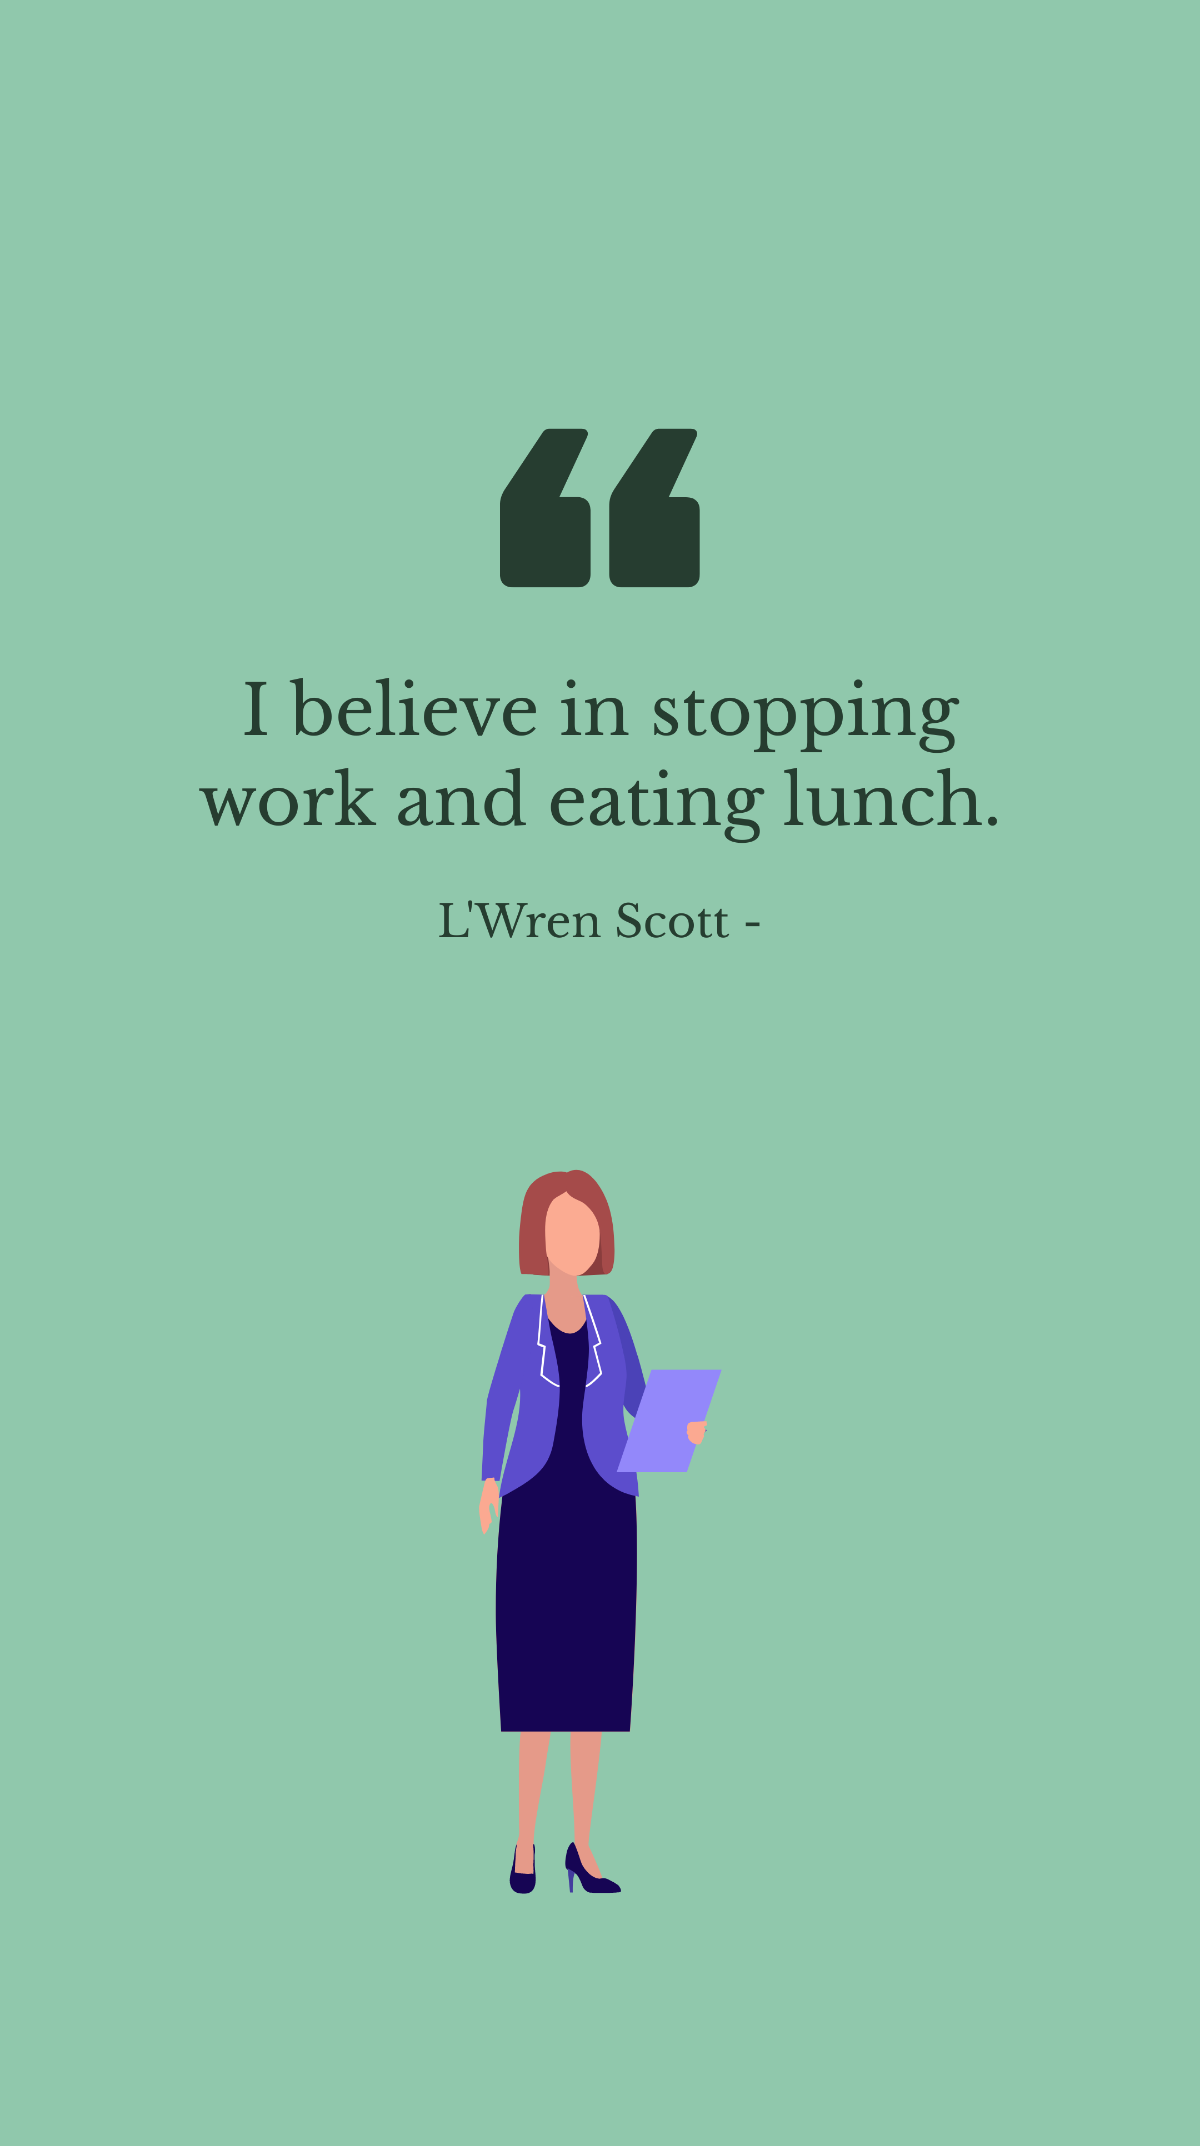 L'Wren Scott - I believe in stopping work and eating lunch.